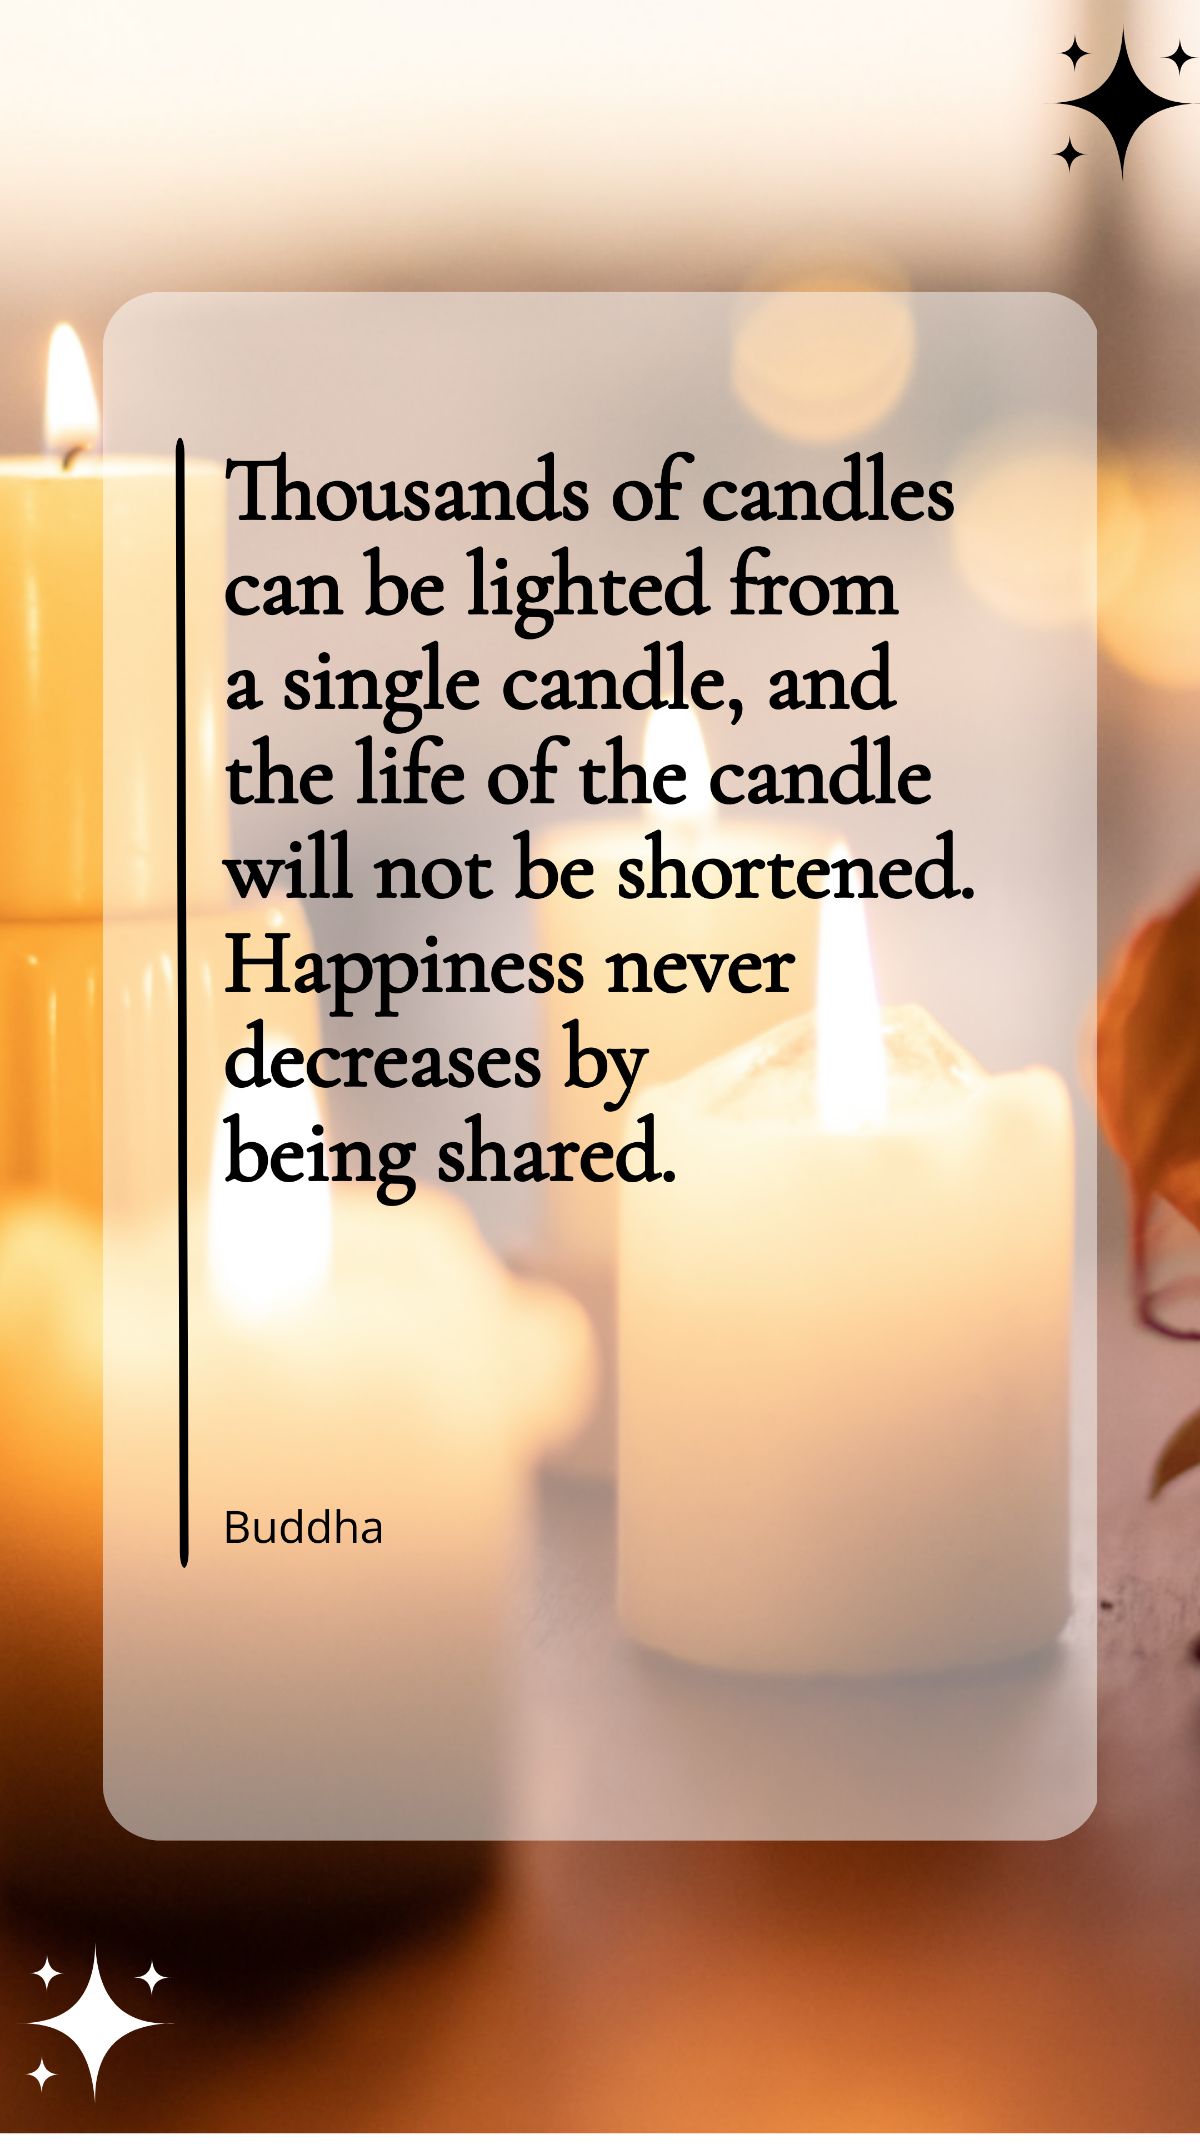 Buddha - Thousands of candles can be lighted from a single candle, and the life of the candle will not be shortened. Happiness never decreases by being shared. Template